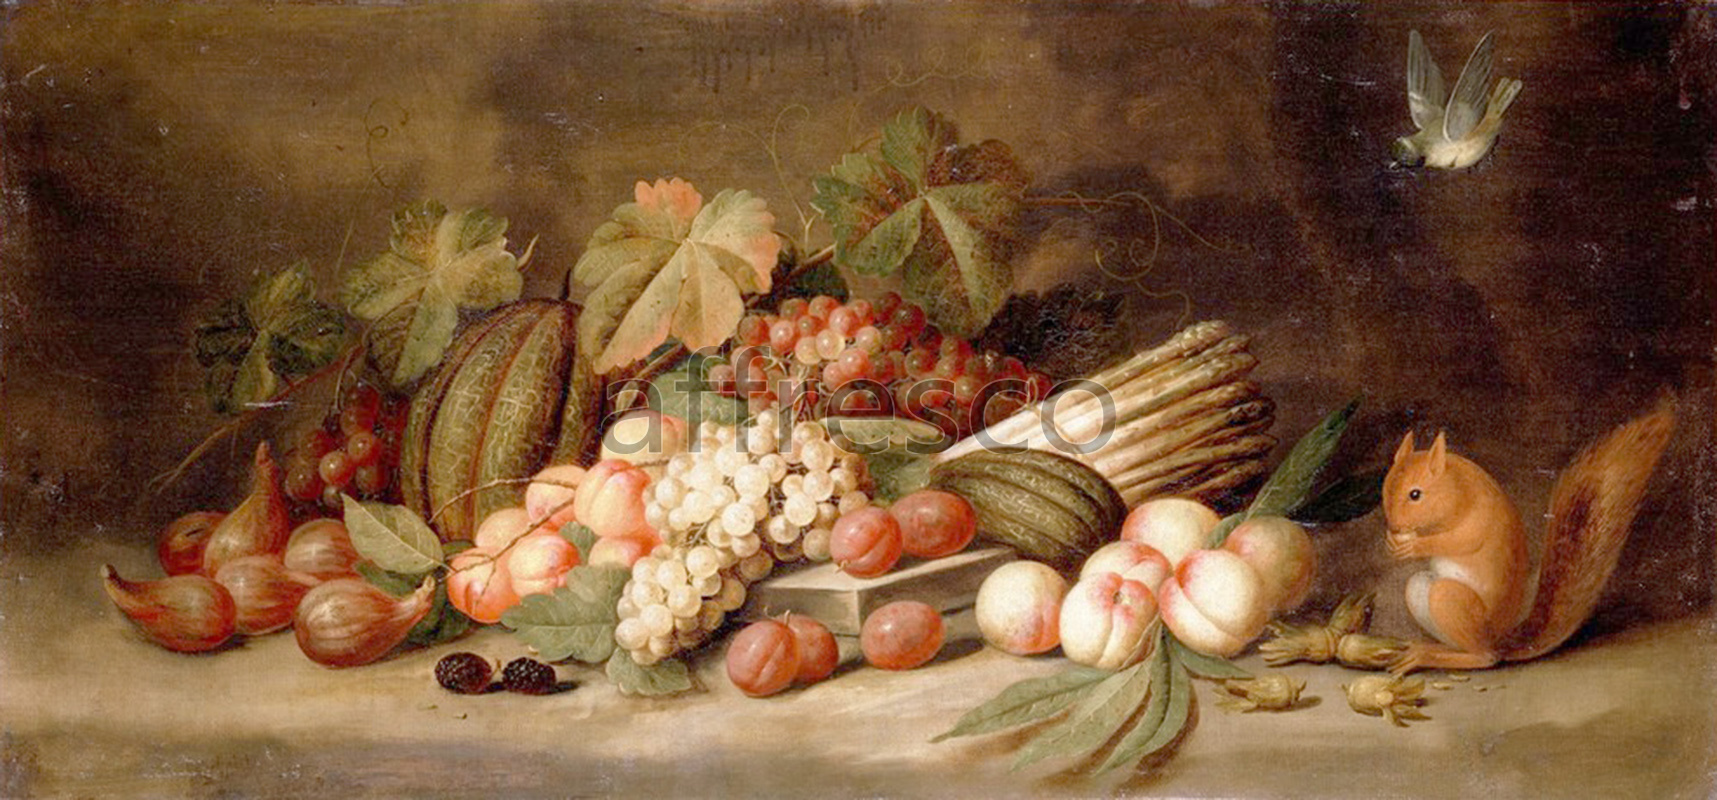 Каталог Аффреско, НатюрмортGillemans Jan Pauwel the elder, Still Life with Fruit and a Squirrel | арт. Gillemans Jan Pauwel the elder, Still Life with Fruit and a Squirrel